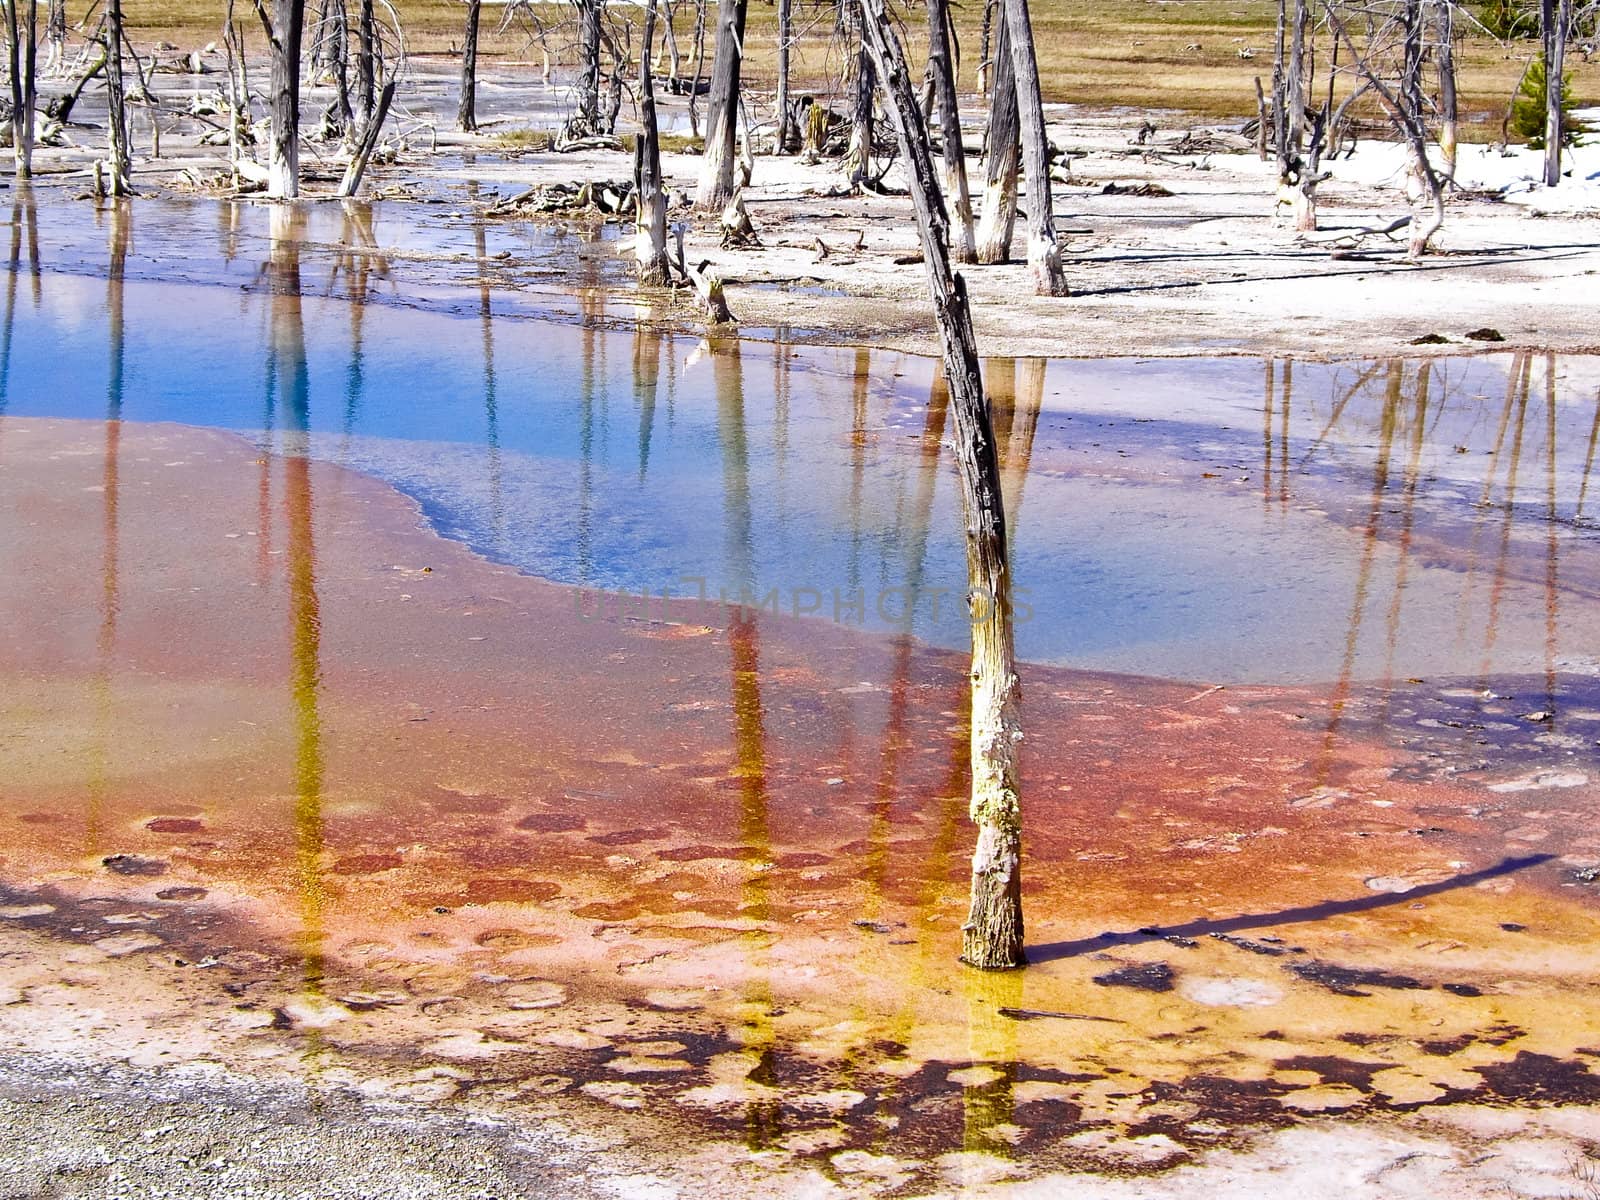 Trees in acidic thermal pool in Yellowstone Park